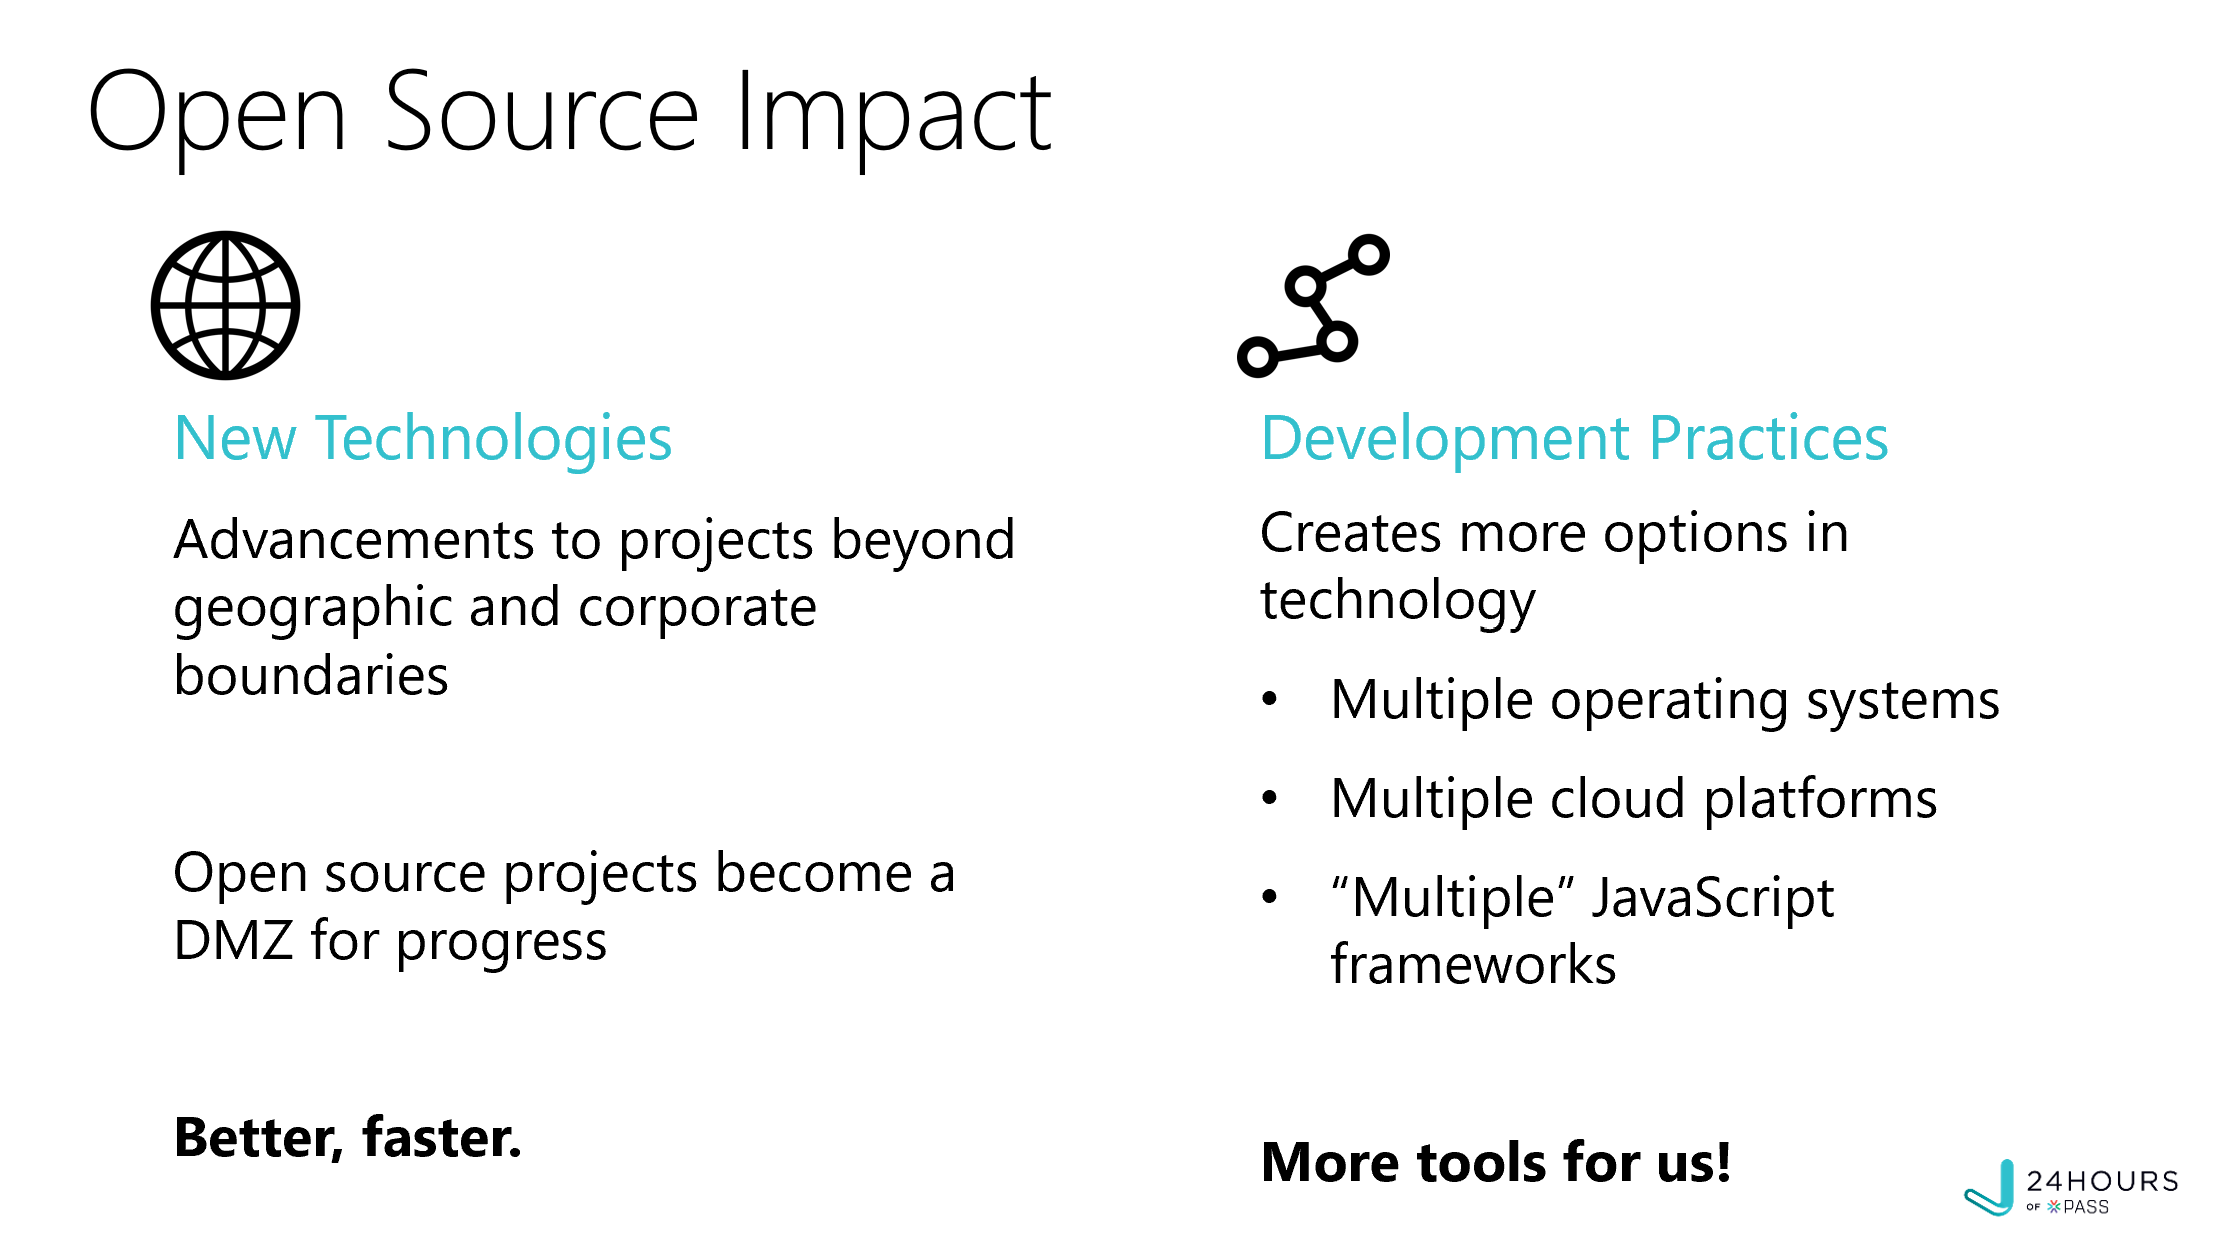 Open Source Impact
New Technologies: Better, faster
Development Practices: More tools for us